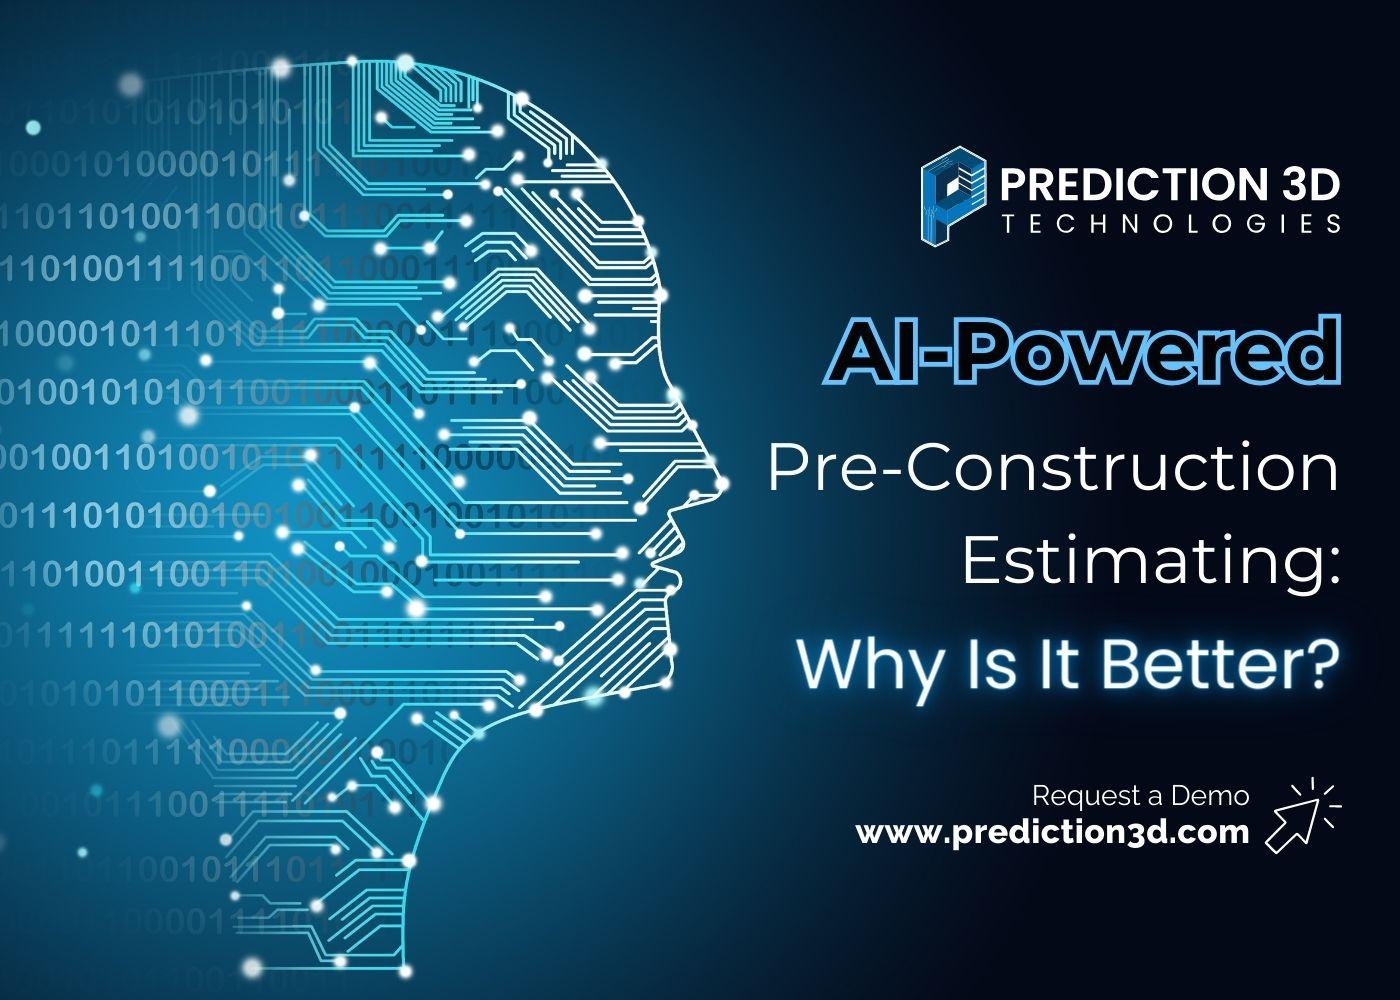 ai-powered pre-construction estimating: why is it better?